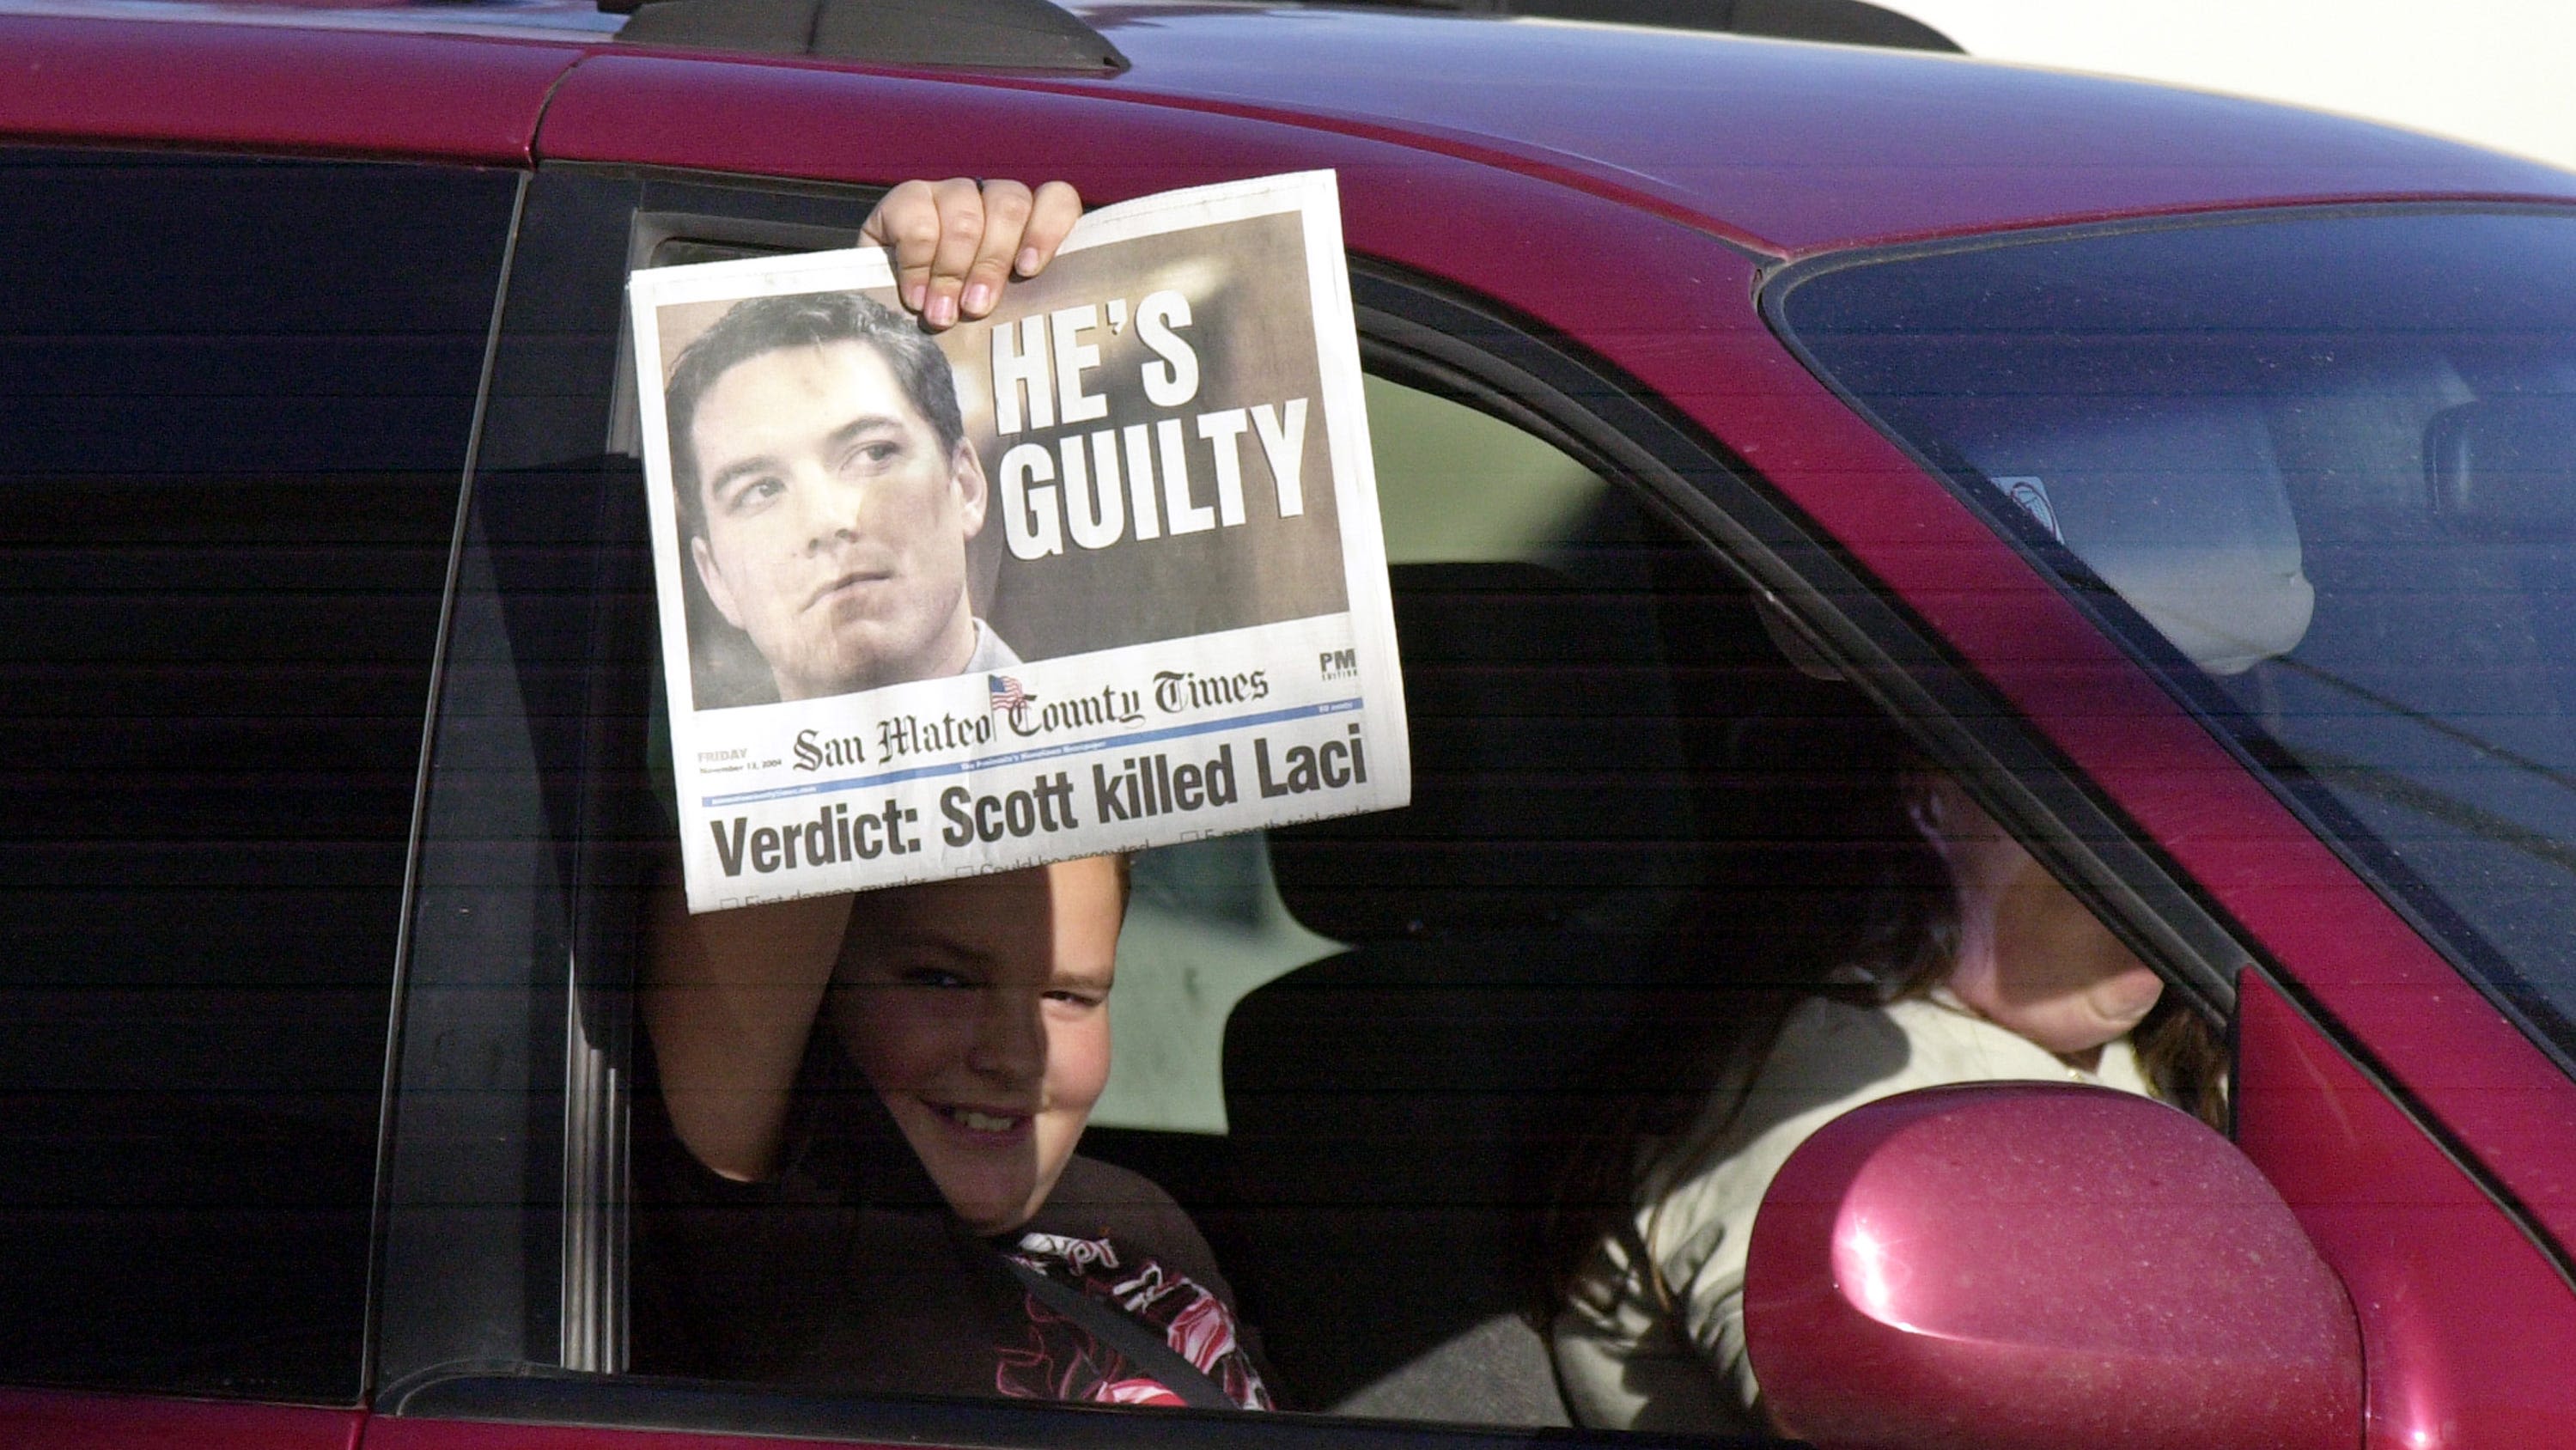 Judge allows duct tape to be retested in Scott Peterson case, denies other requests: reports